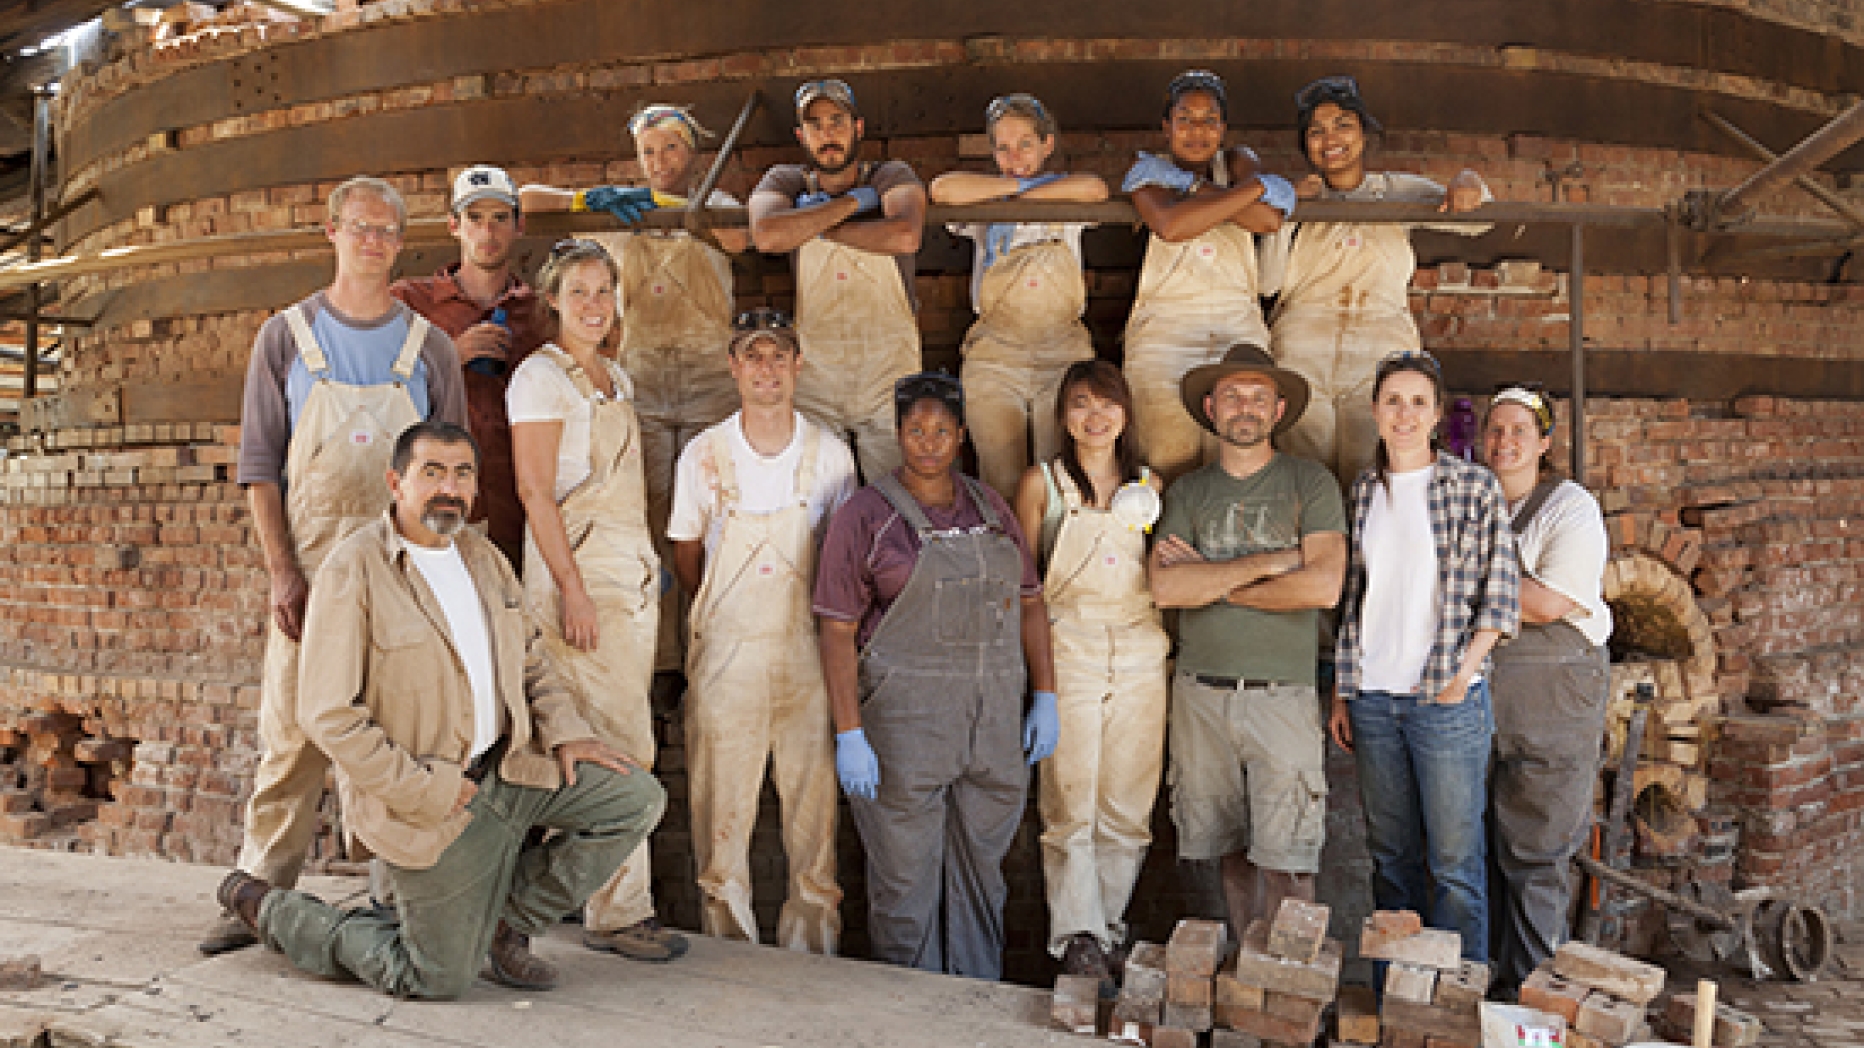 Group photo of project participants in front of scaffolding and brick structure.